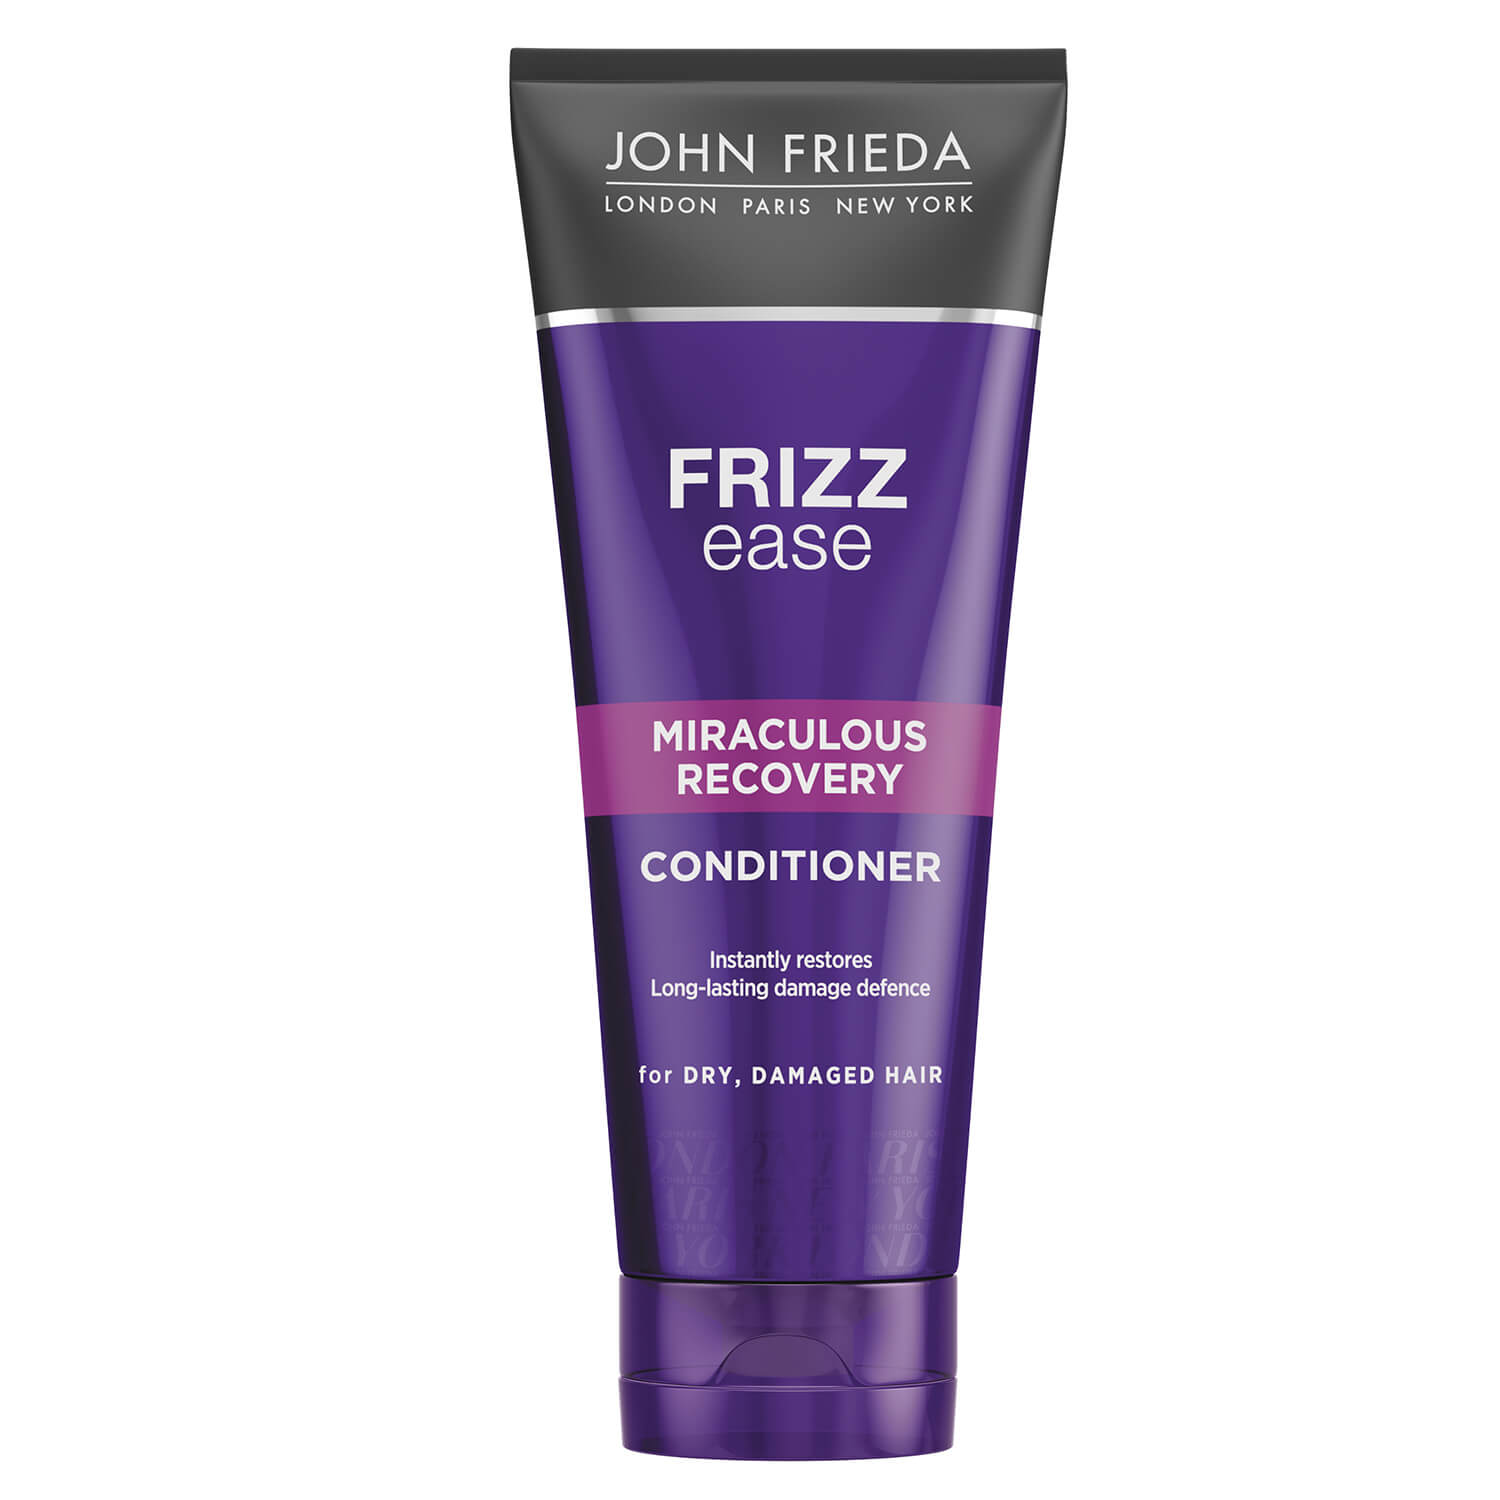 John Frieda Frizz Ease Miraculous Recovery Conditioner 1 Shaws Department Stores